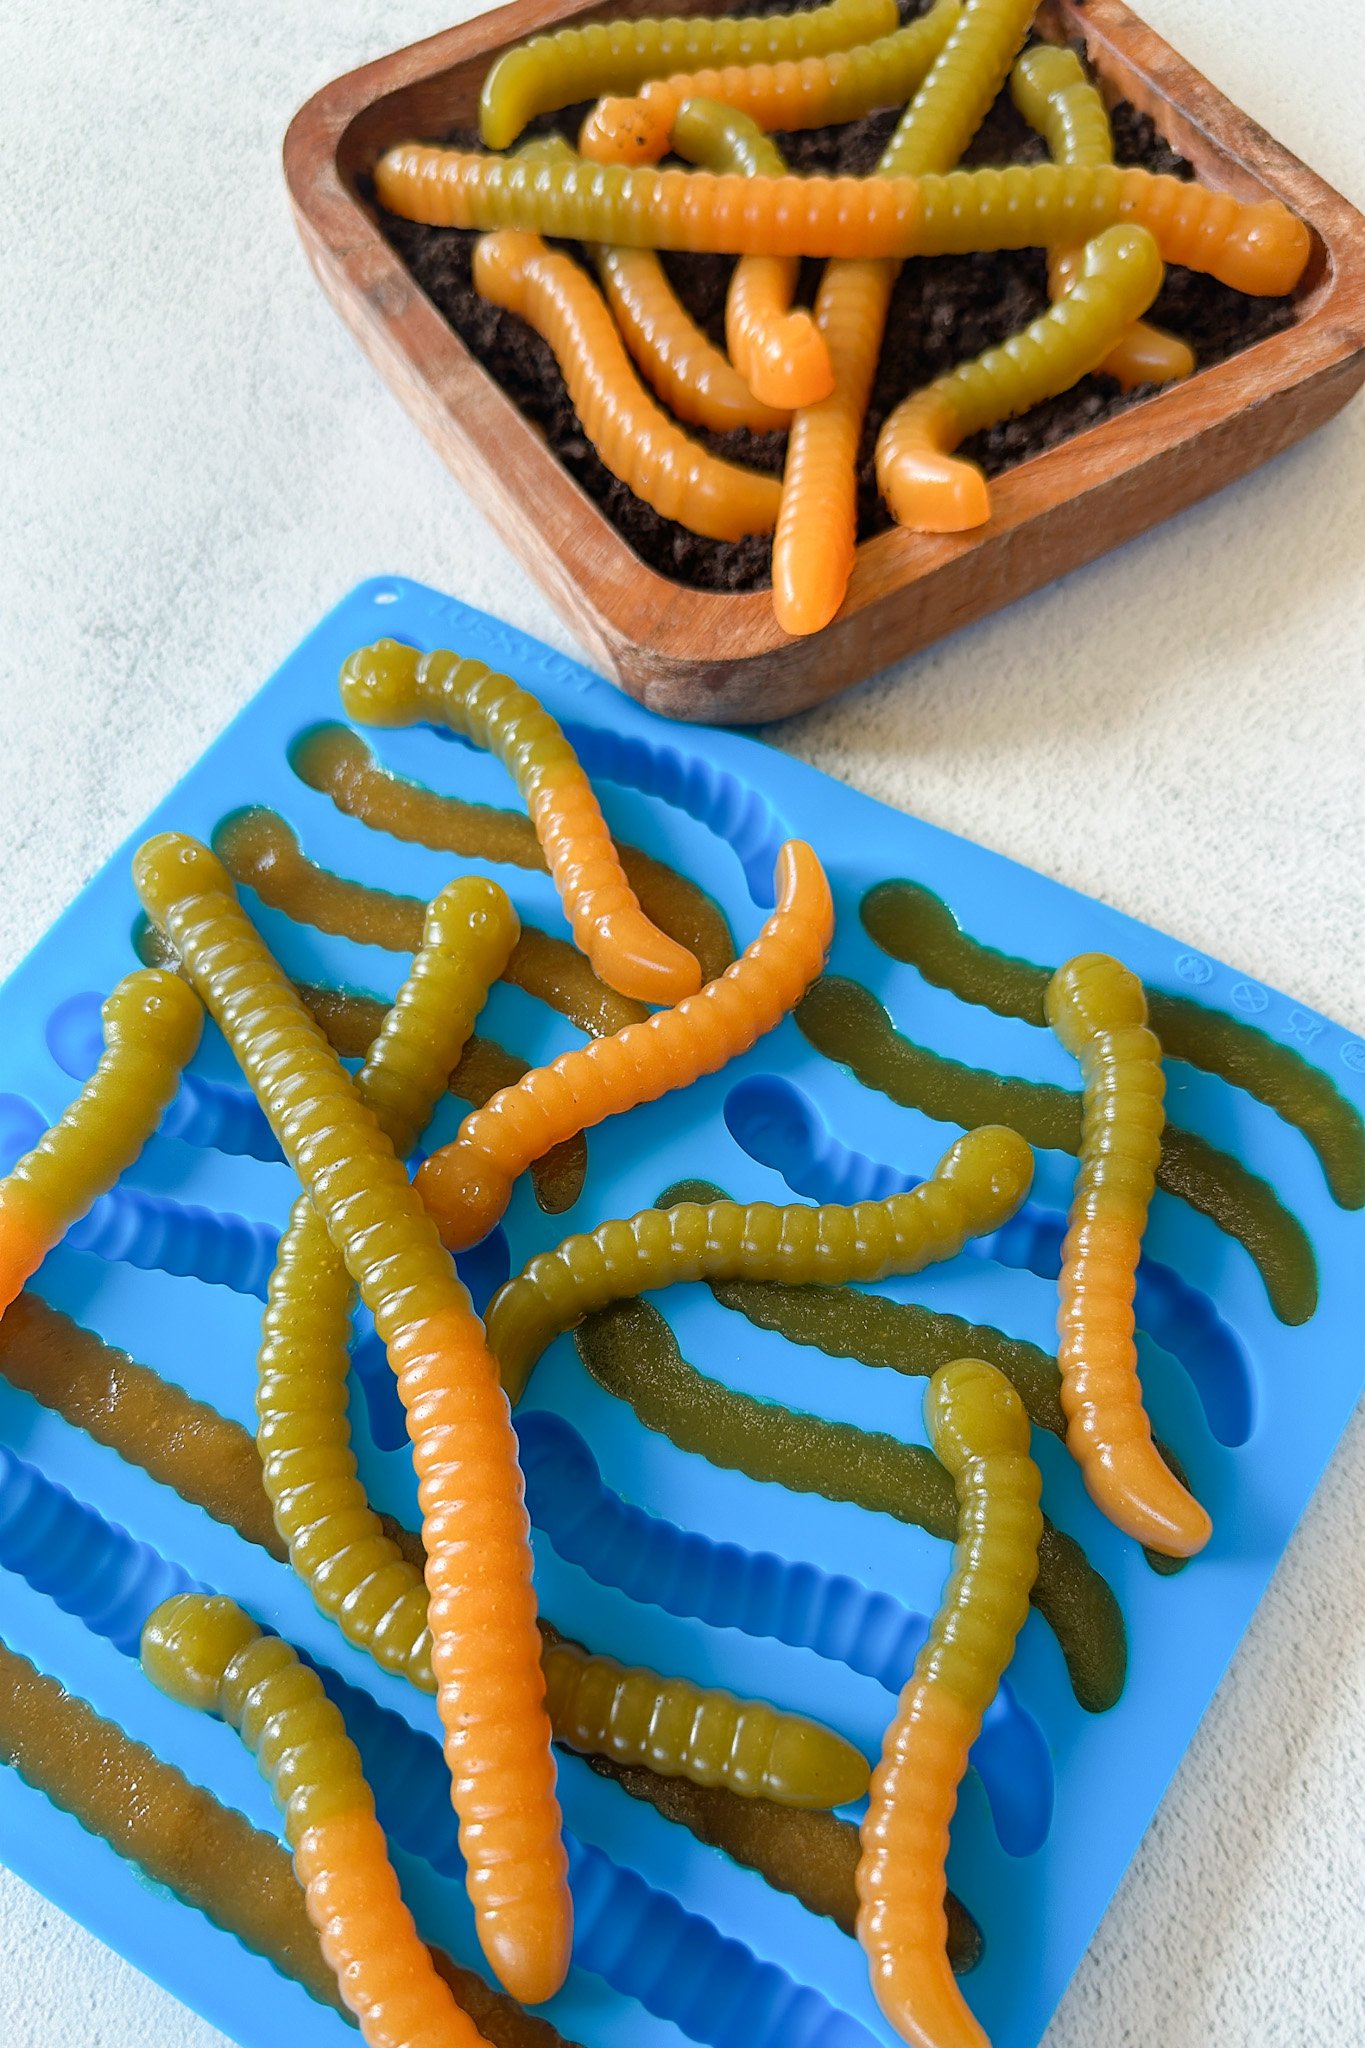 Gummy worms served on a plate with crushed up cookies.